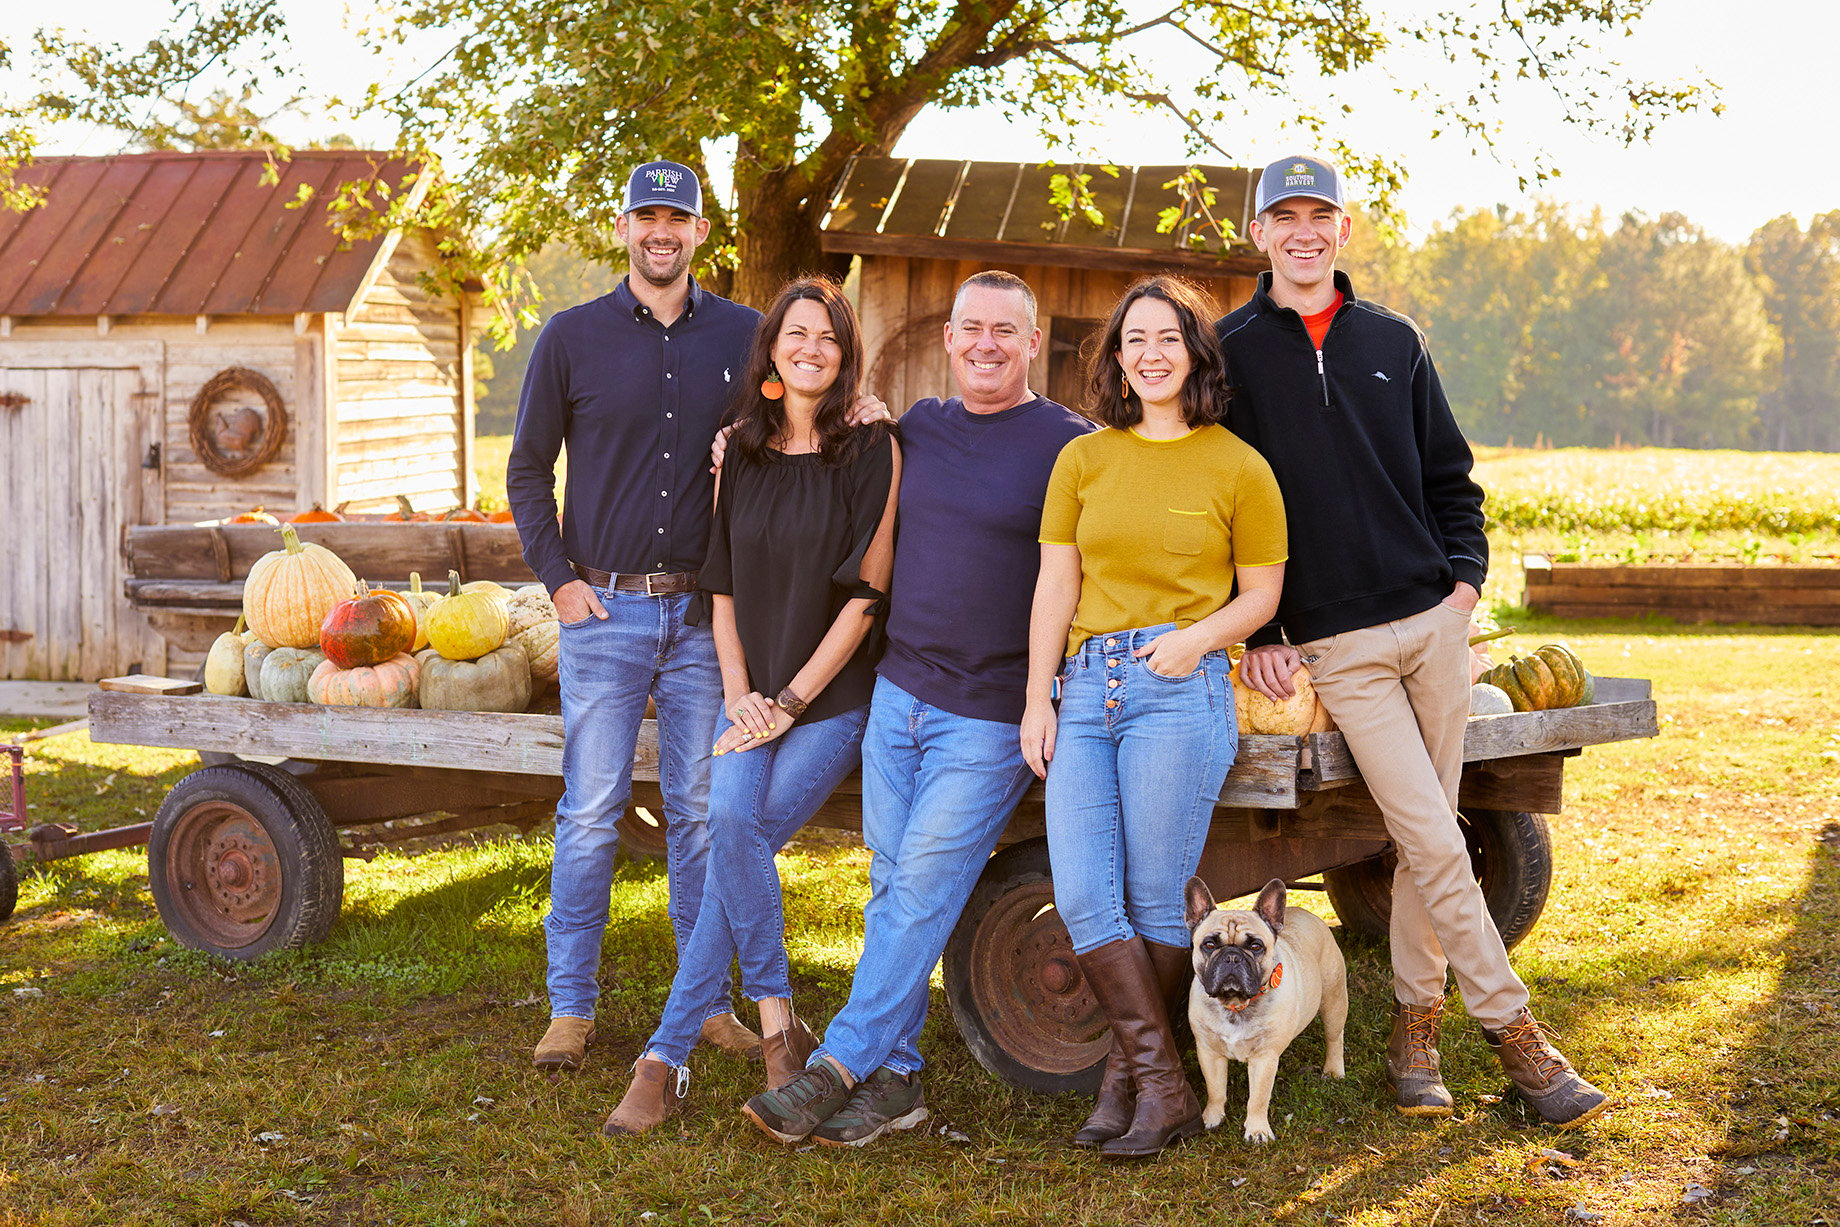 Parrish family and dog sitting in front of a wagon full of Pumpkins shot by Tyler Darden for Virginia Living magazine